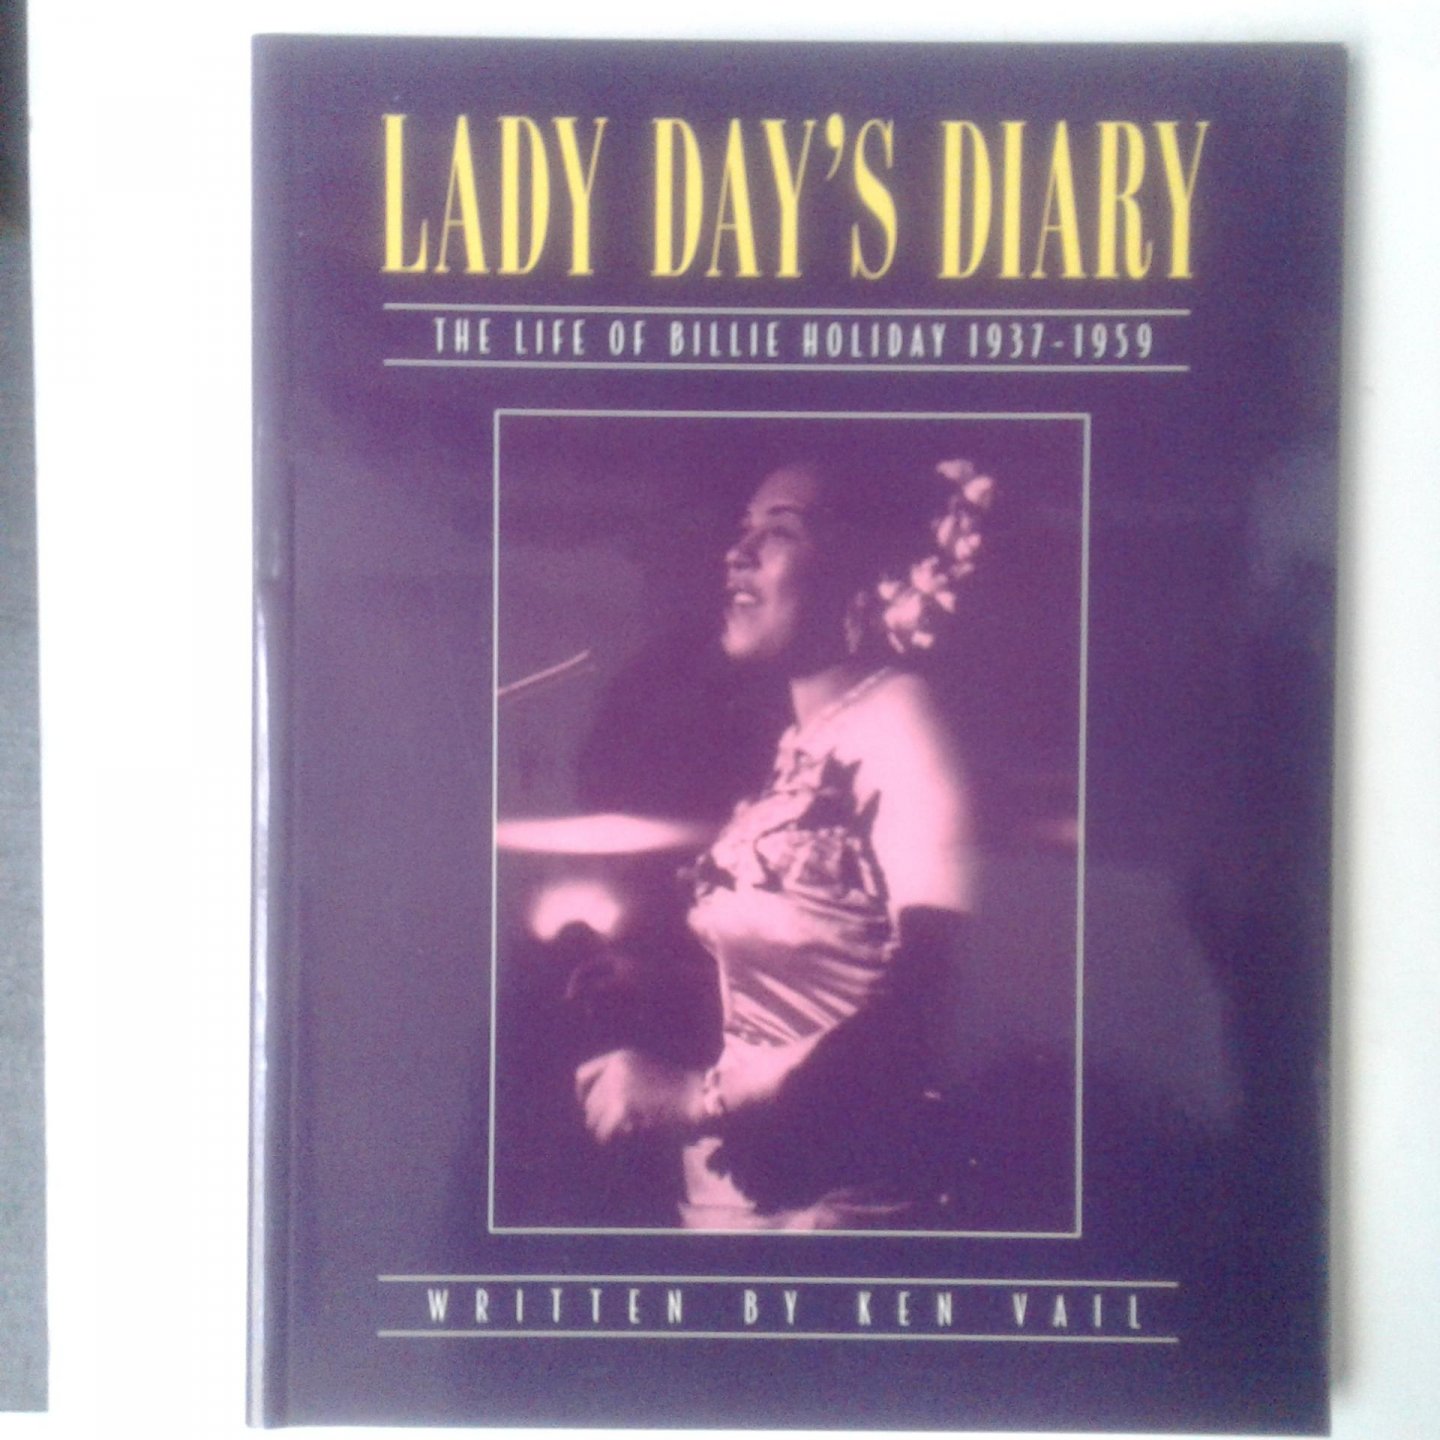 Vail, Ken - Lady Day's Diary ; The Life of Billie Holiday 1937-1959